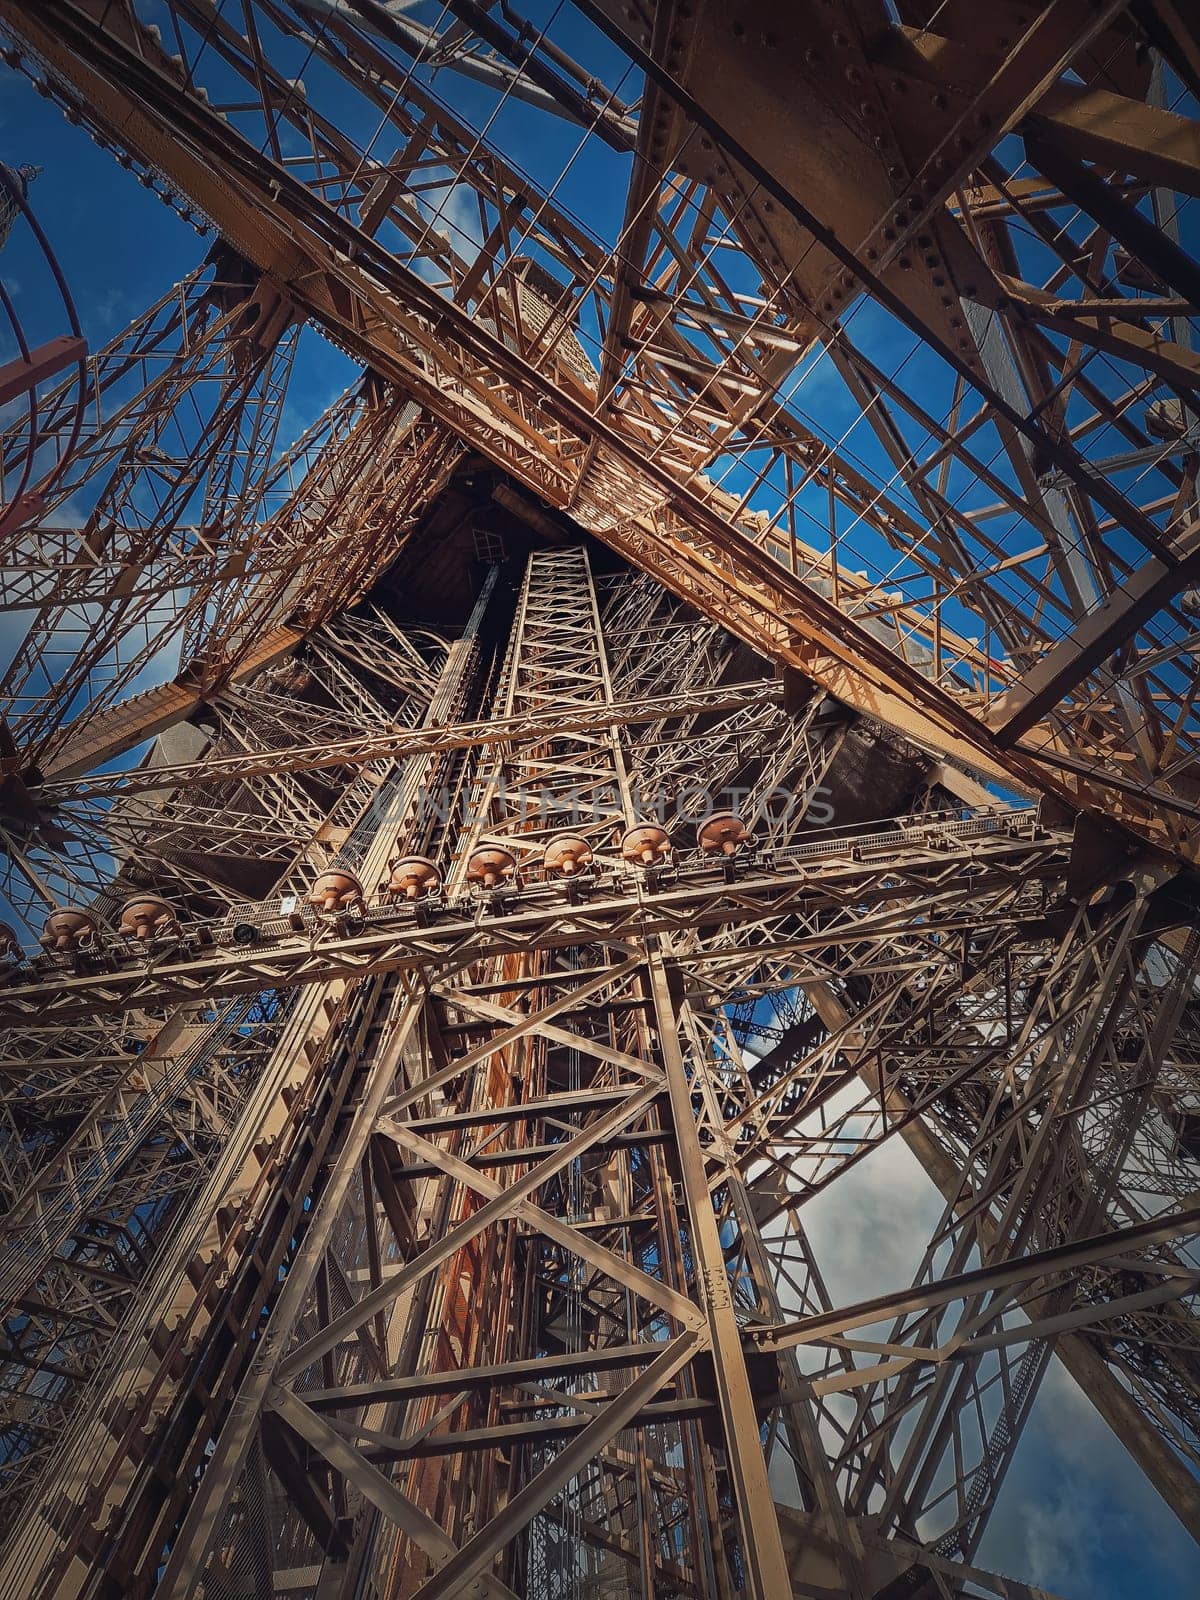 Eiffel Tower architecture details Paris, France. Underneath the metallic structure, steel elements with different geometric shapes by psychoshadow